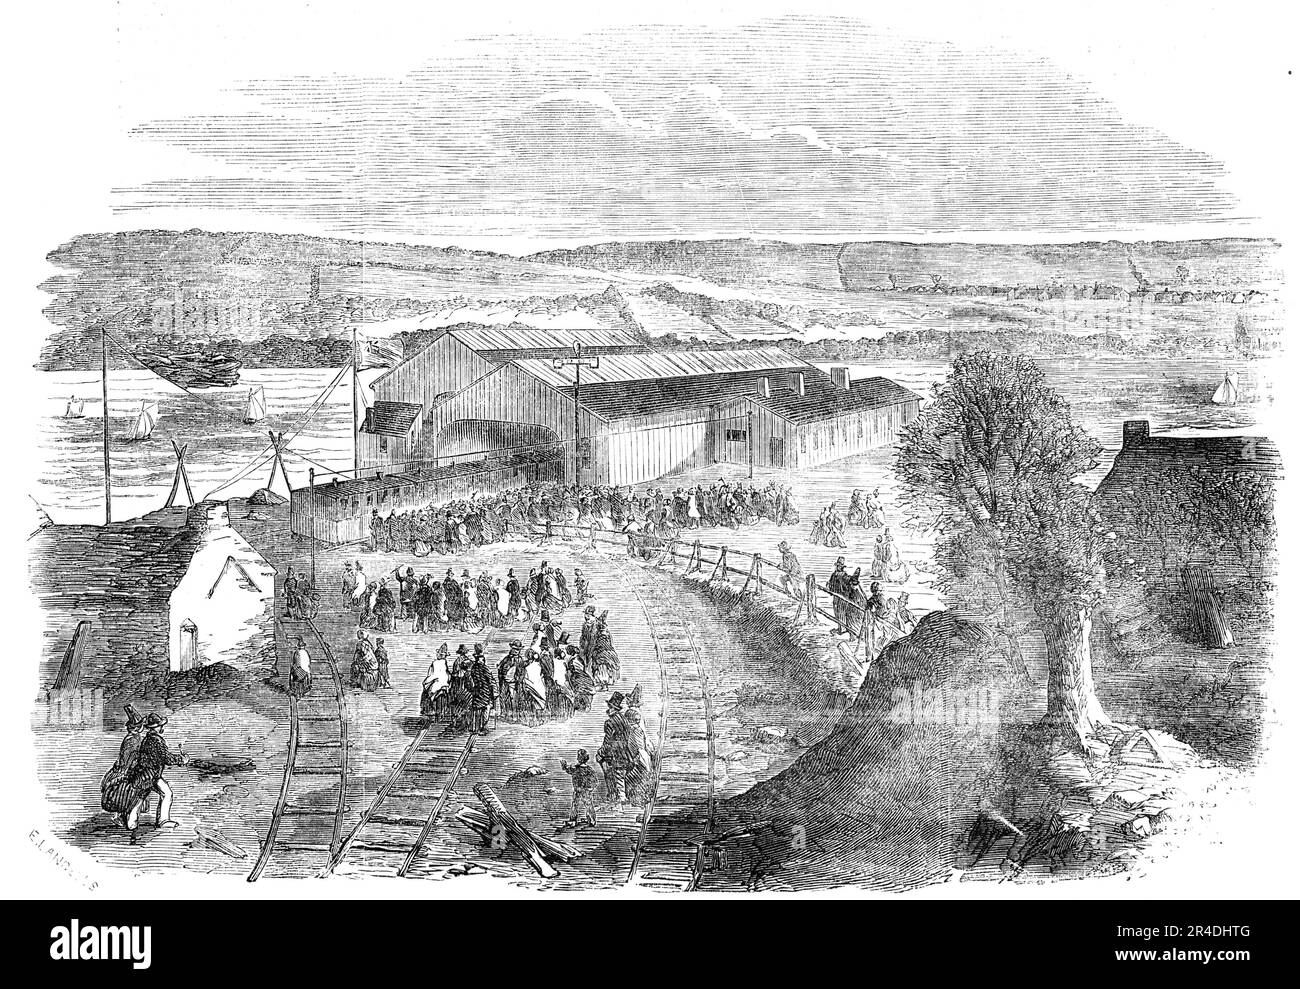 Opening of the South Wales Extension Railway, to Milford Haven, 1856. View of the Railway Terminus at Neyland, with the huts of the Montgomery, North Gloucester, and Monmouthshire Militia. 'This remote harbour, 285 miles from the metropolis, has, within the last few days, been connected therewith by railway; by means of which it may be reached in nine hours...The terminus almost faces the Royal Pembroke Dockyard...Great, indeed, will. be the importance of the South Wales Railway extension...should the expectation of its shareholders and directors prove well founded; for it is anticipated that Stock Photo